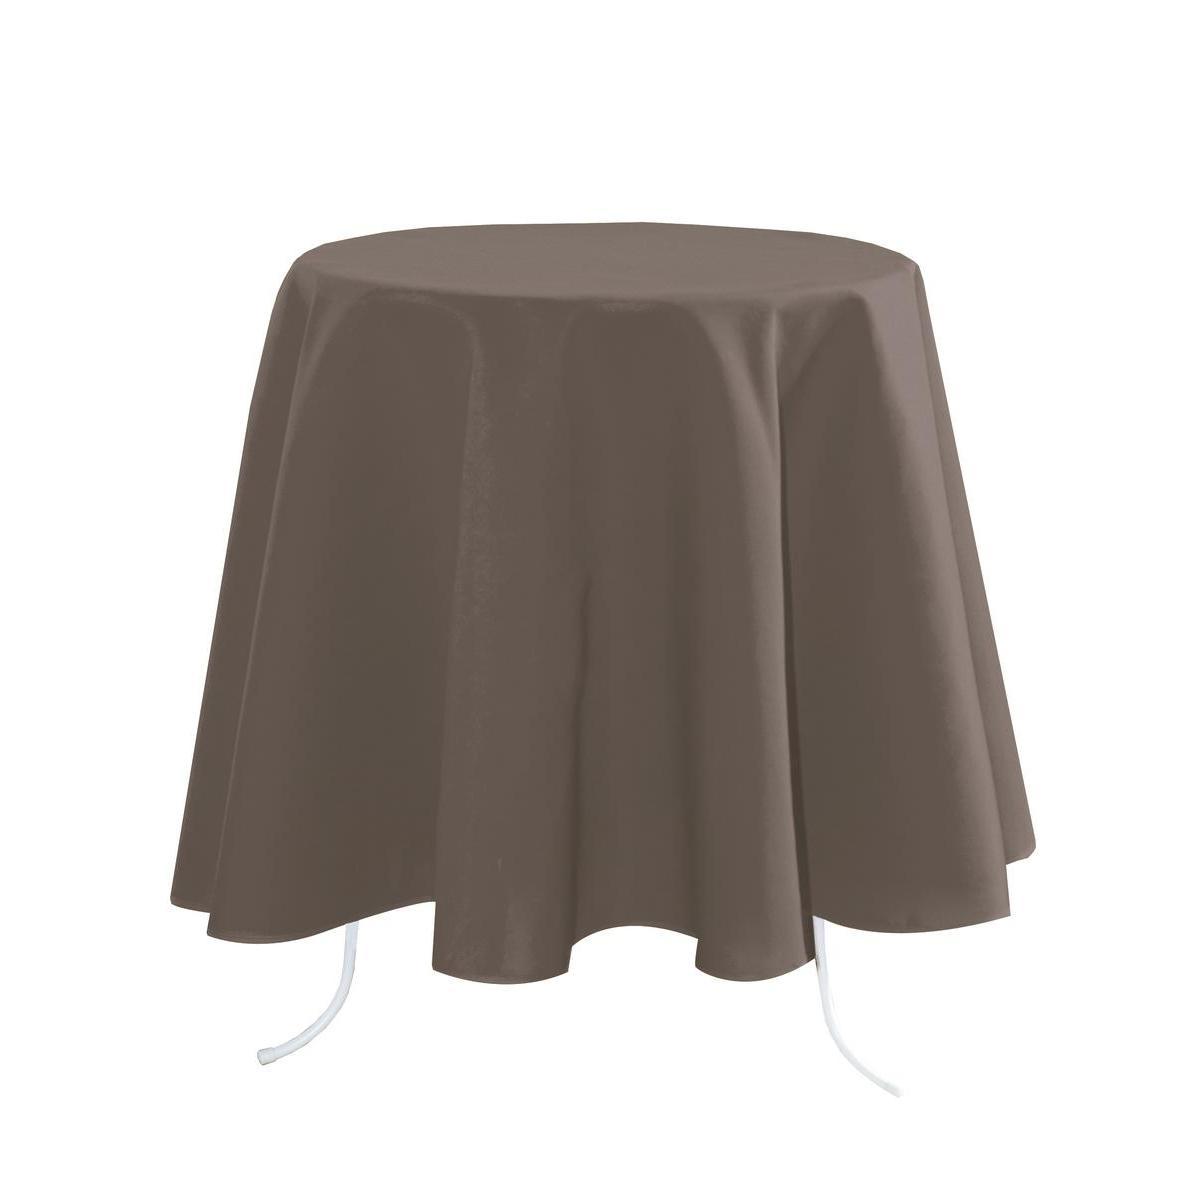 Nappe rectangulaire - 100 % Polyester - 148 x 240 cm - Marron taupe